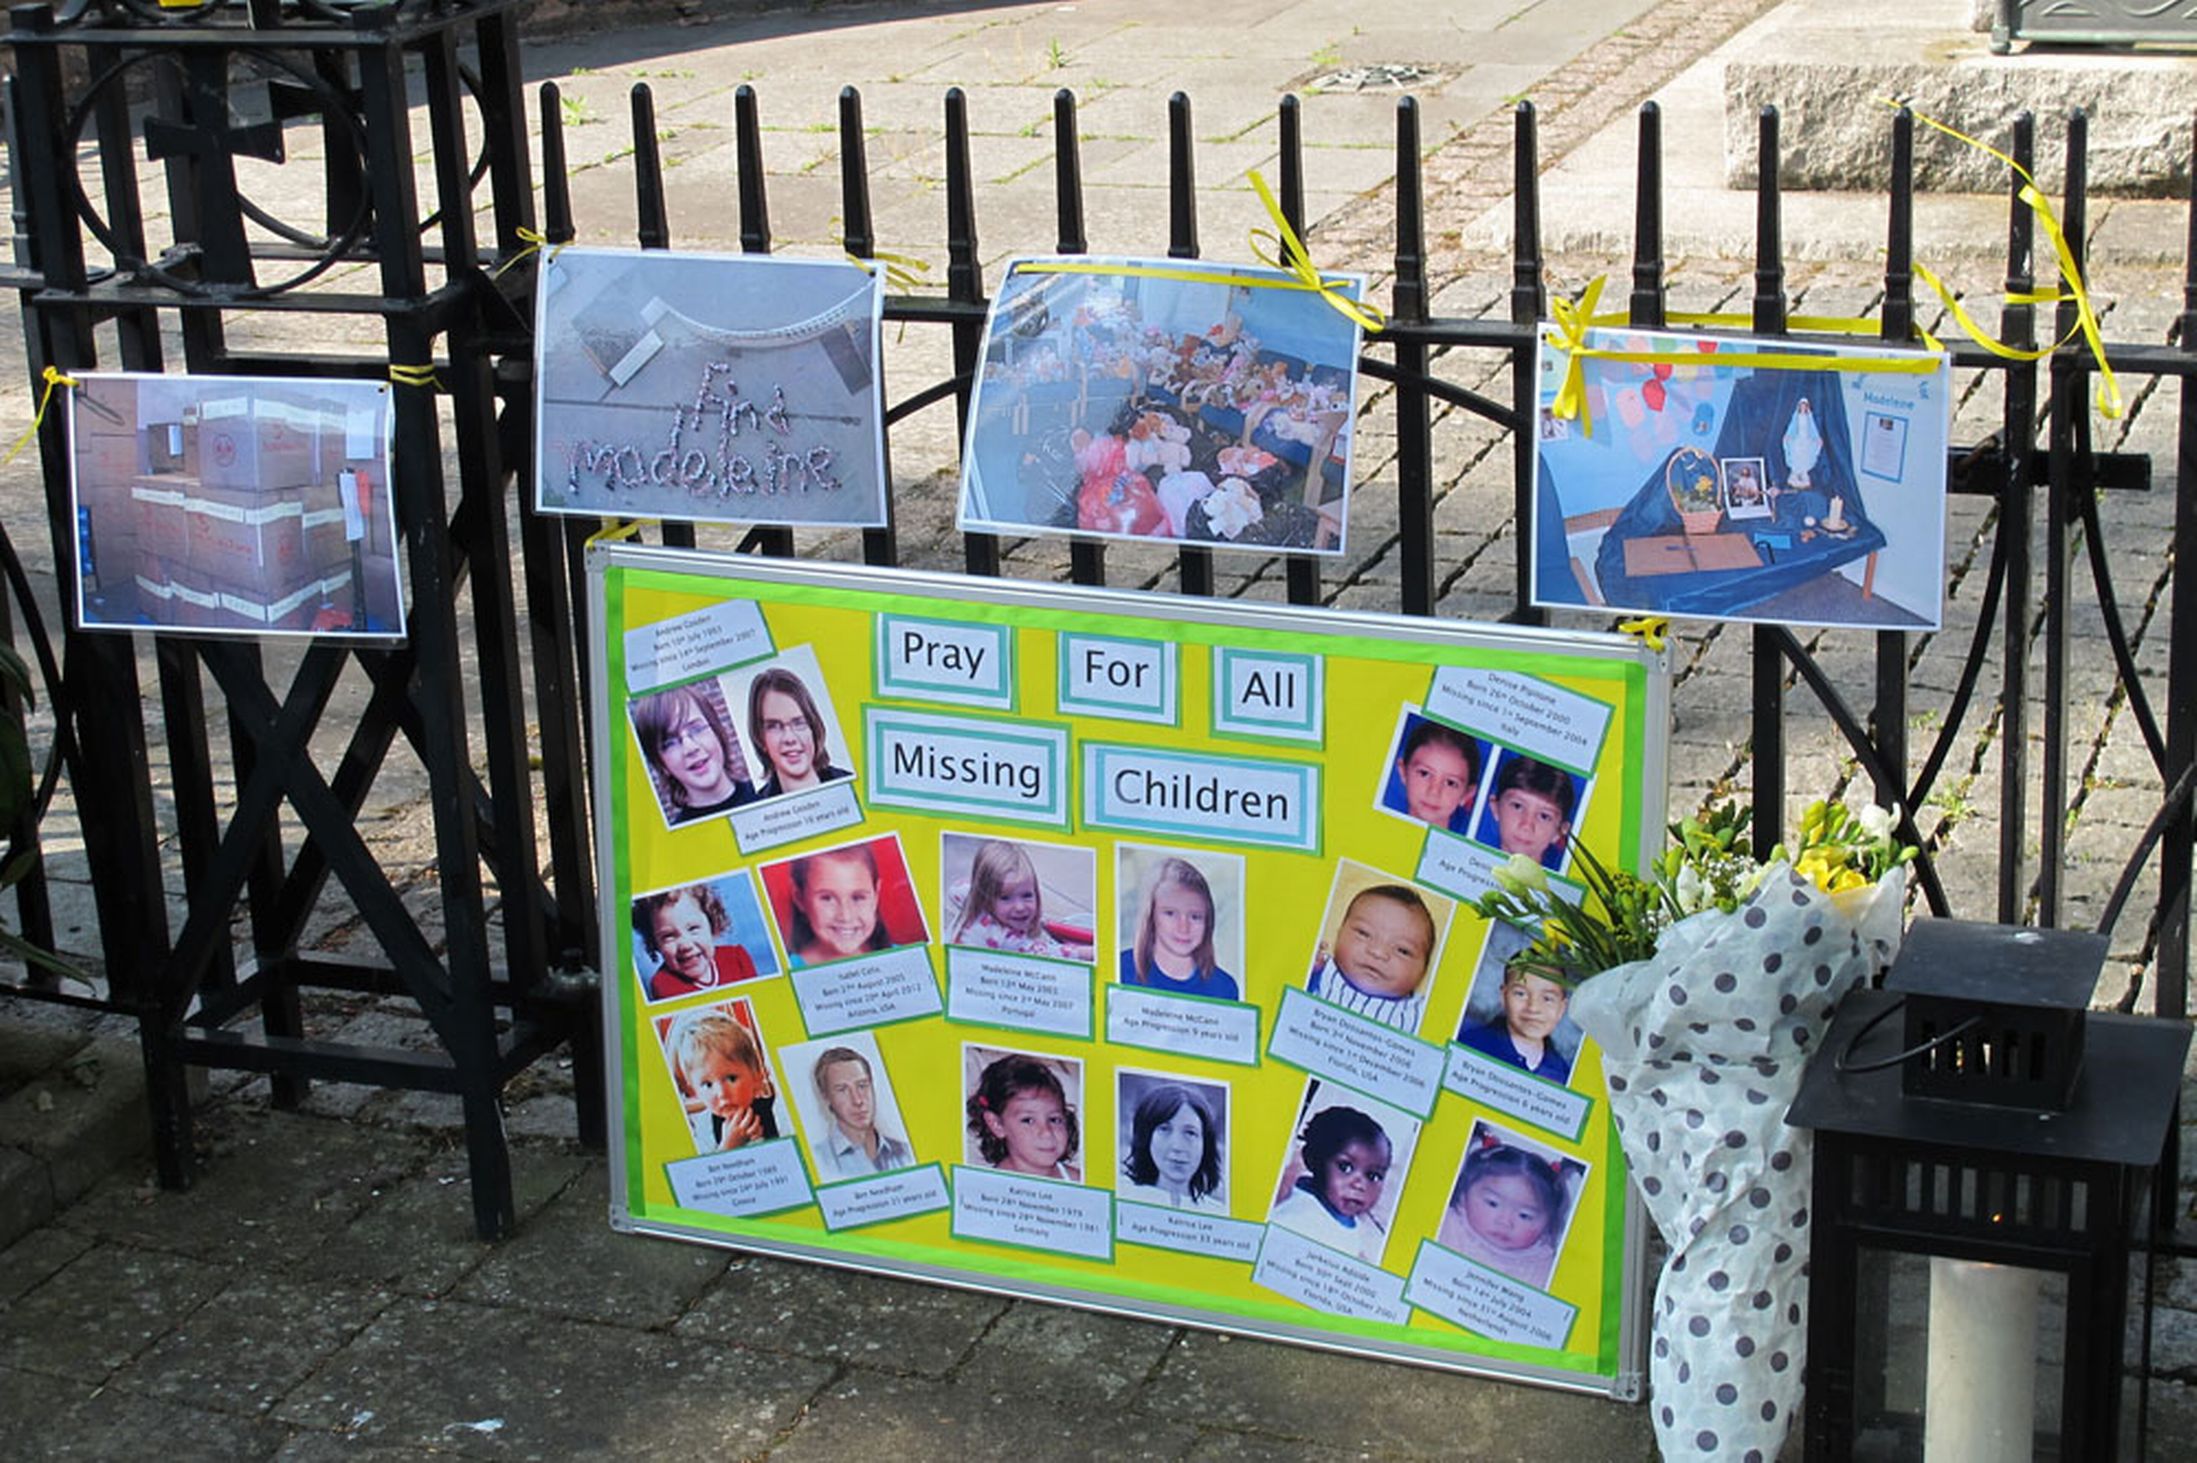 Tributes to missing Madeleine McCann, at a low-key open-air service in the centre of Rothley, Leicestershire, on the seventh anniversary of the girl's disappearance